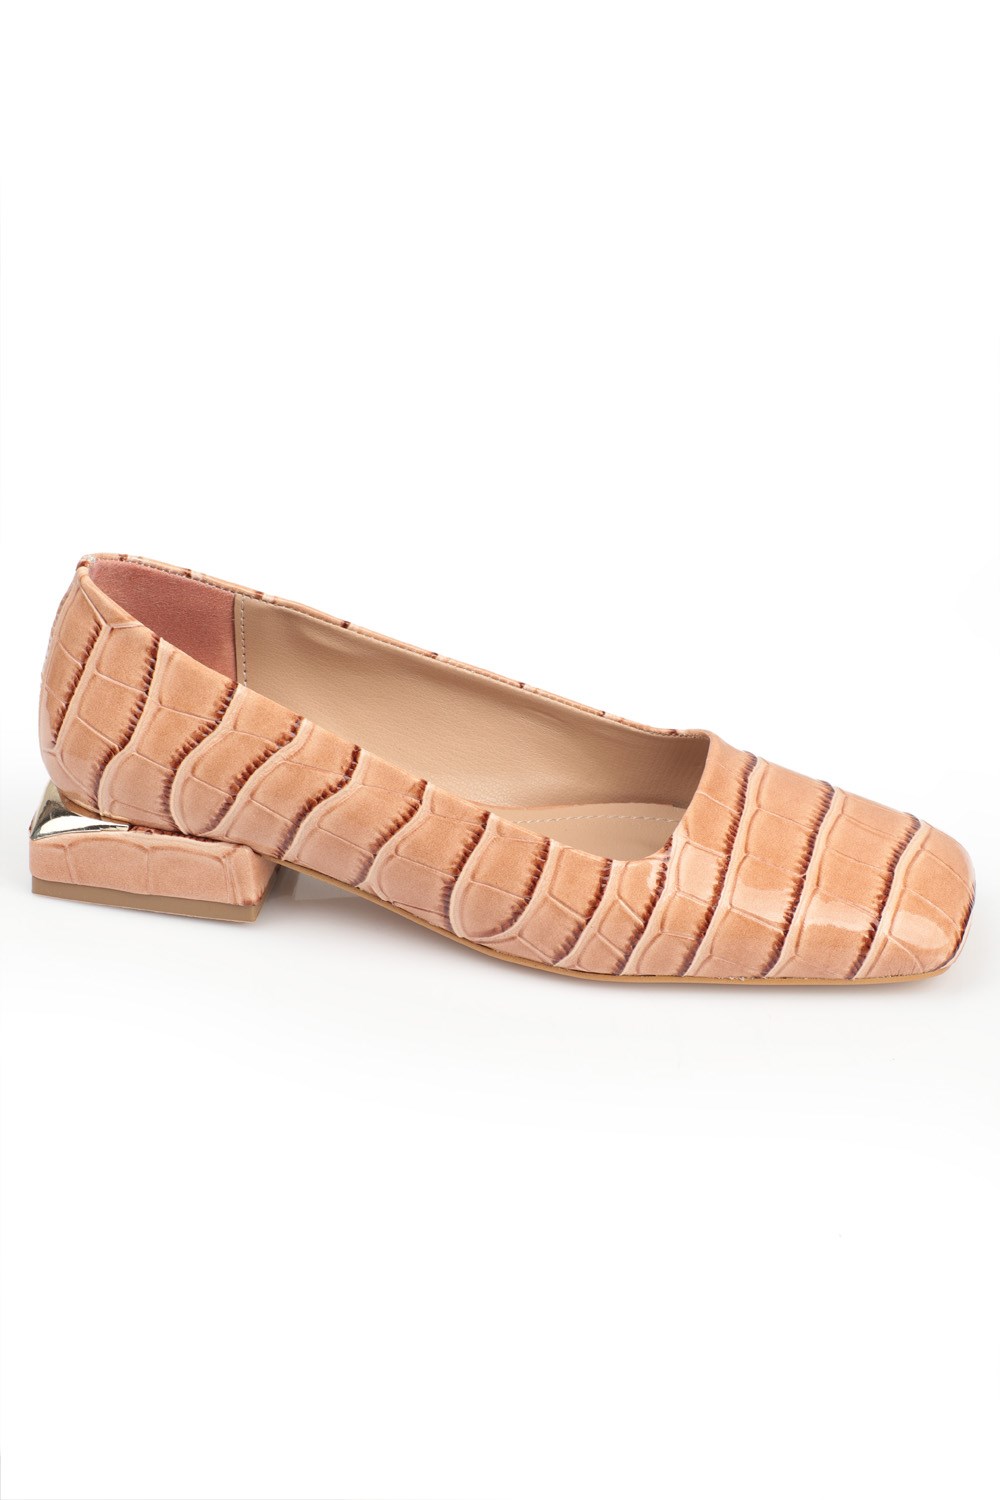 Capone Outfitters 3148 Women Nude Ballerina | caponeoutfitters.com